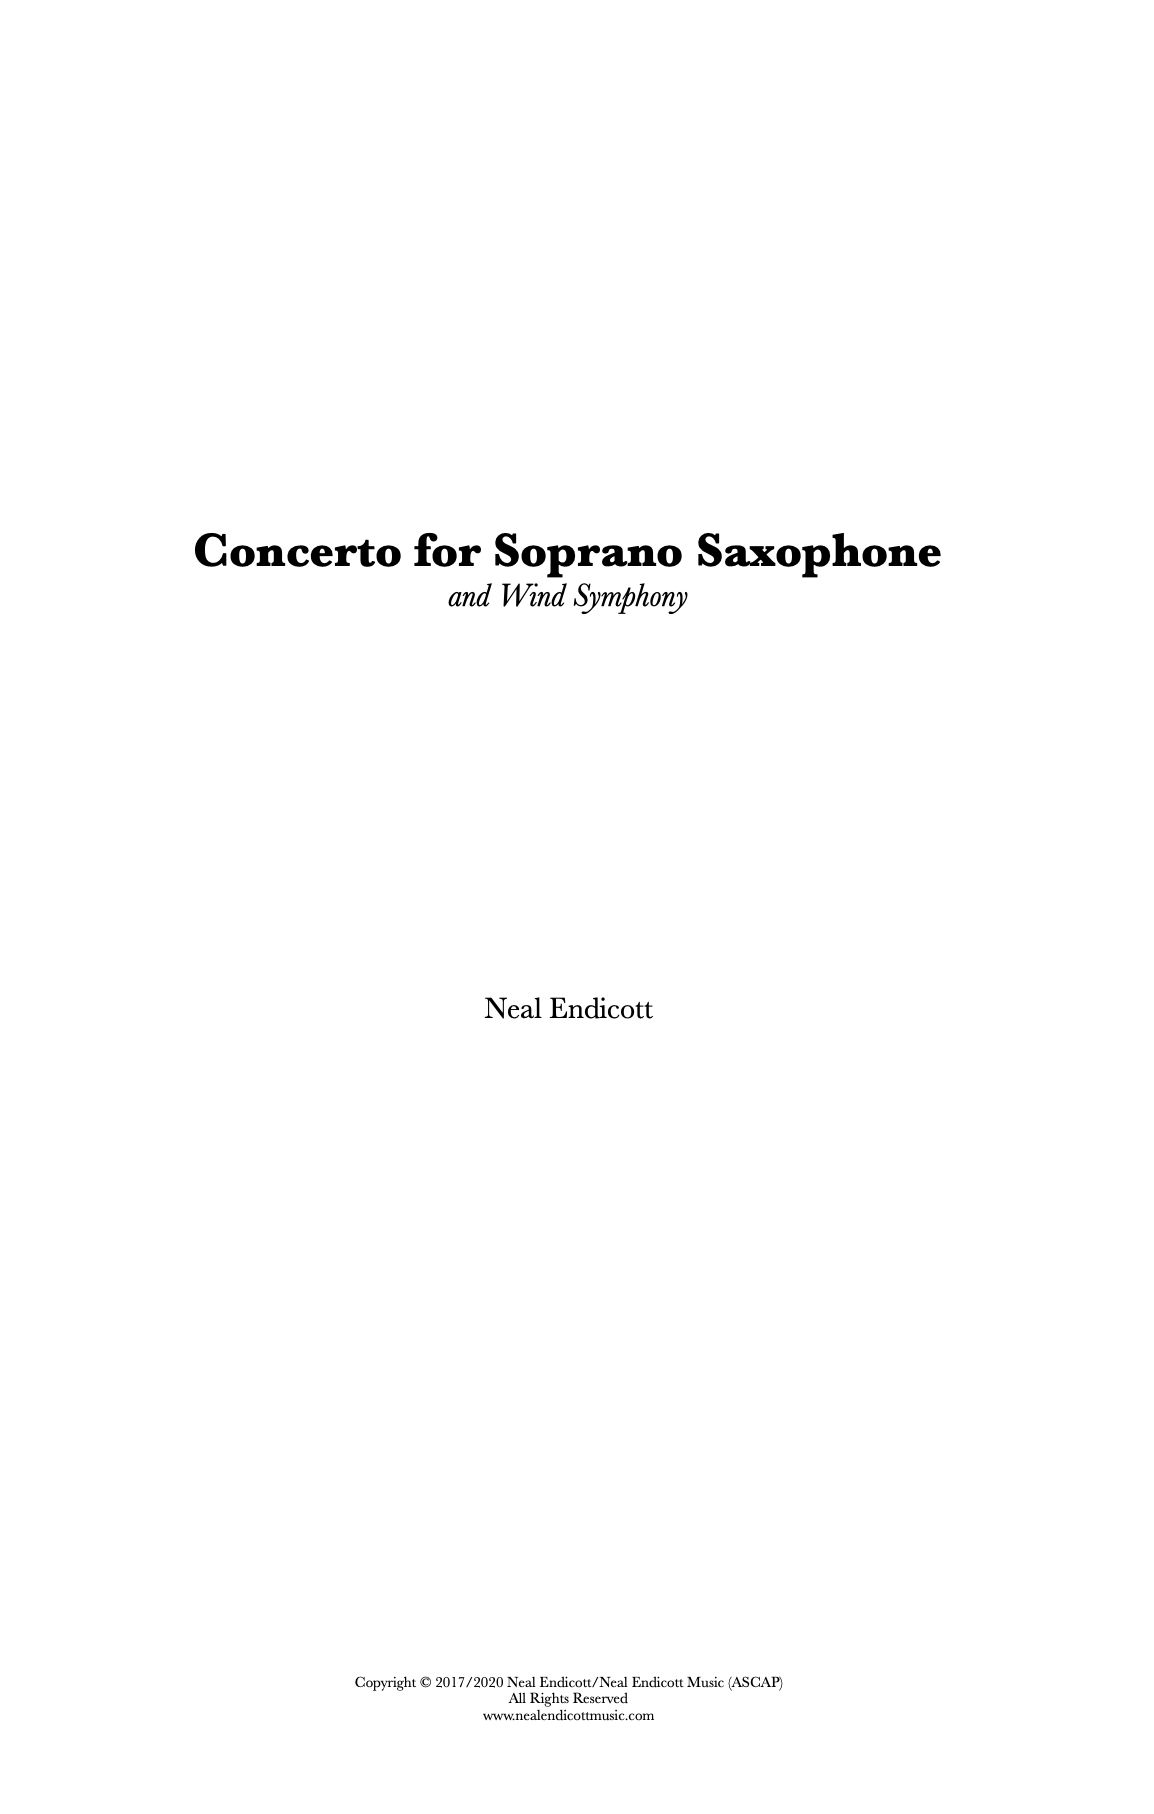 Concerto For Soprano Saxophone And Wind Symphony (Score Only) by Neal Endicott